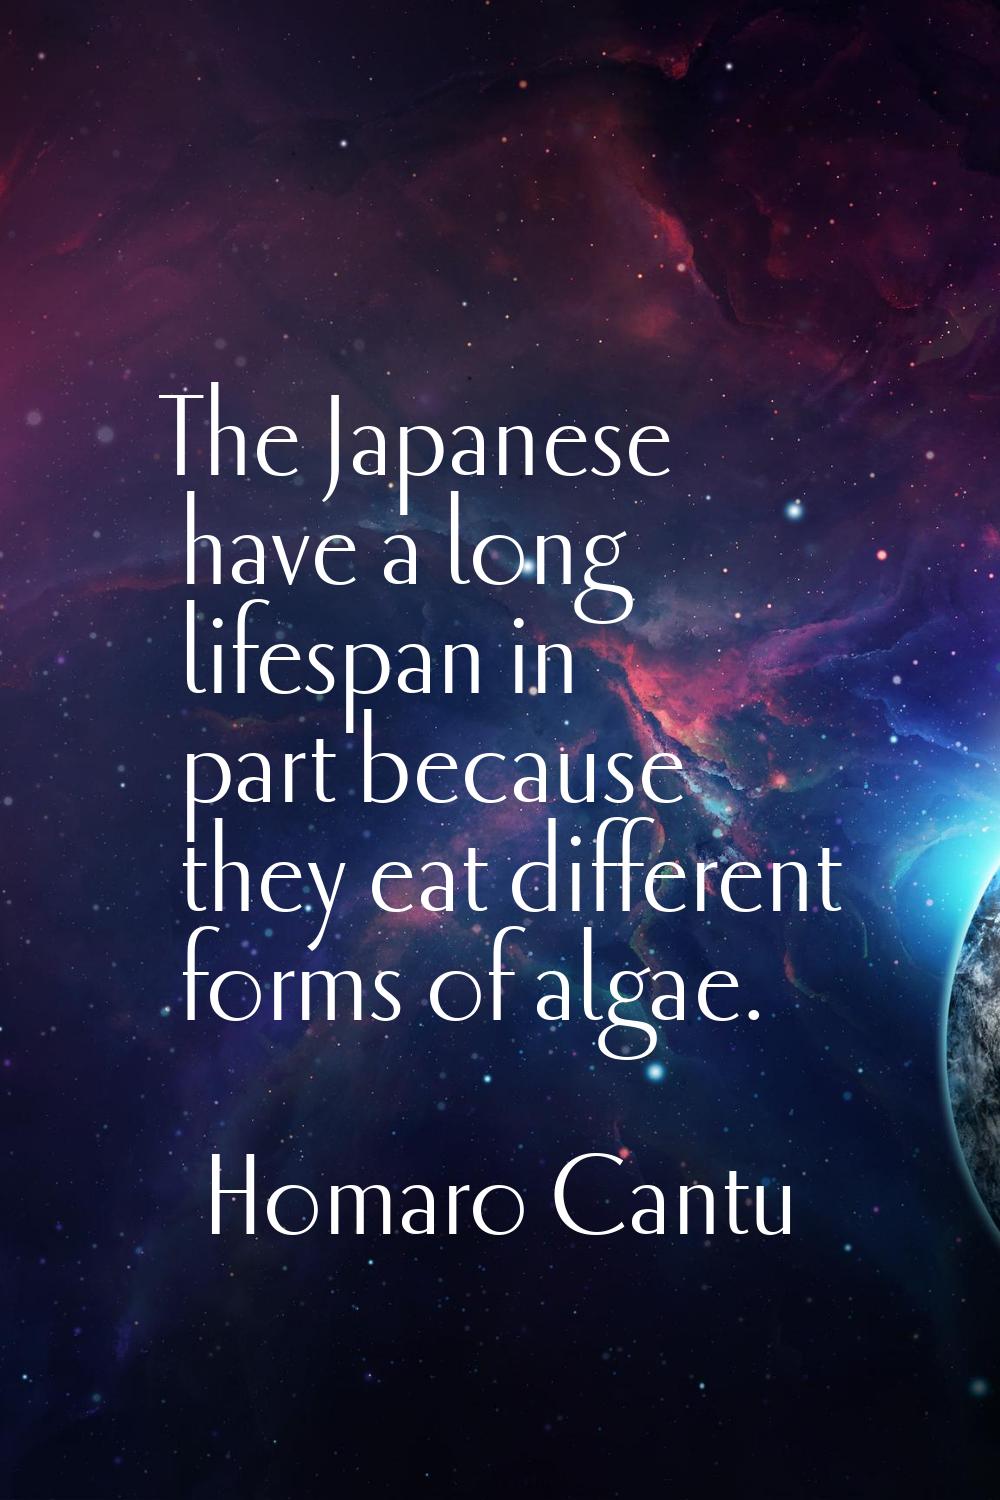 The Japanese have a long lifespan in part because they eat different forms of algae.